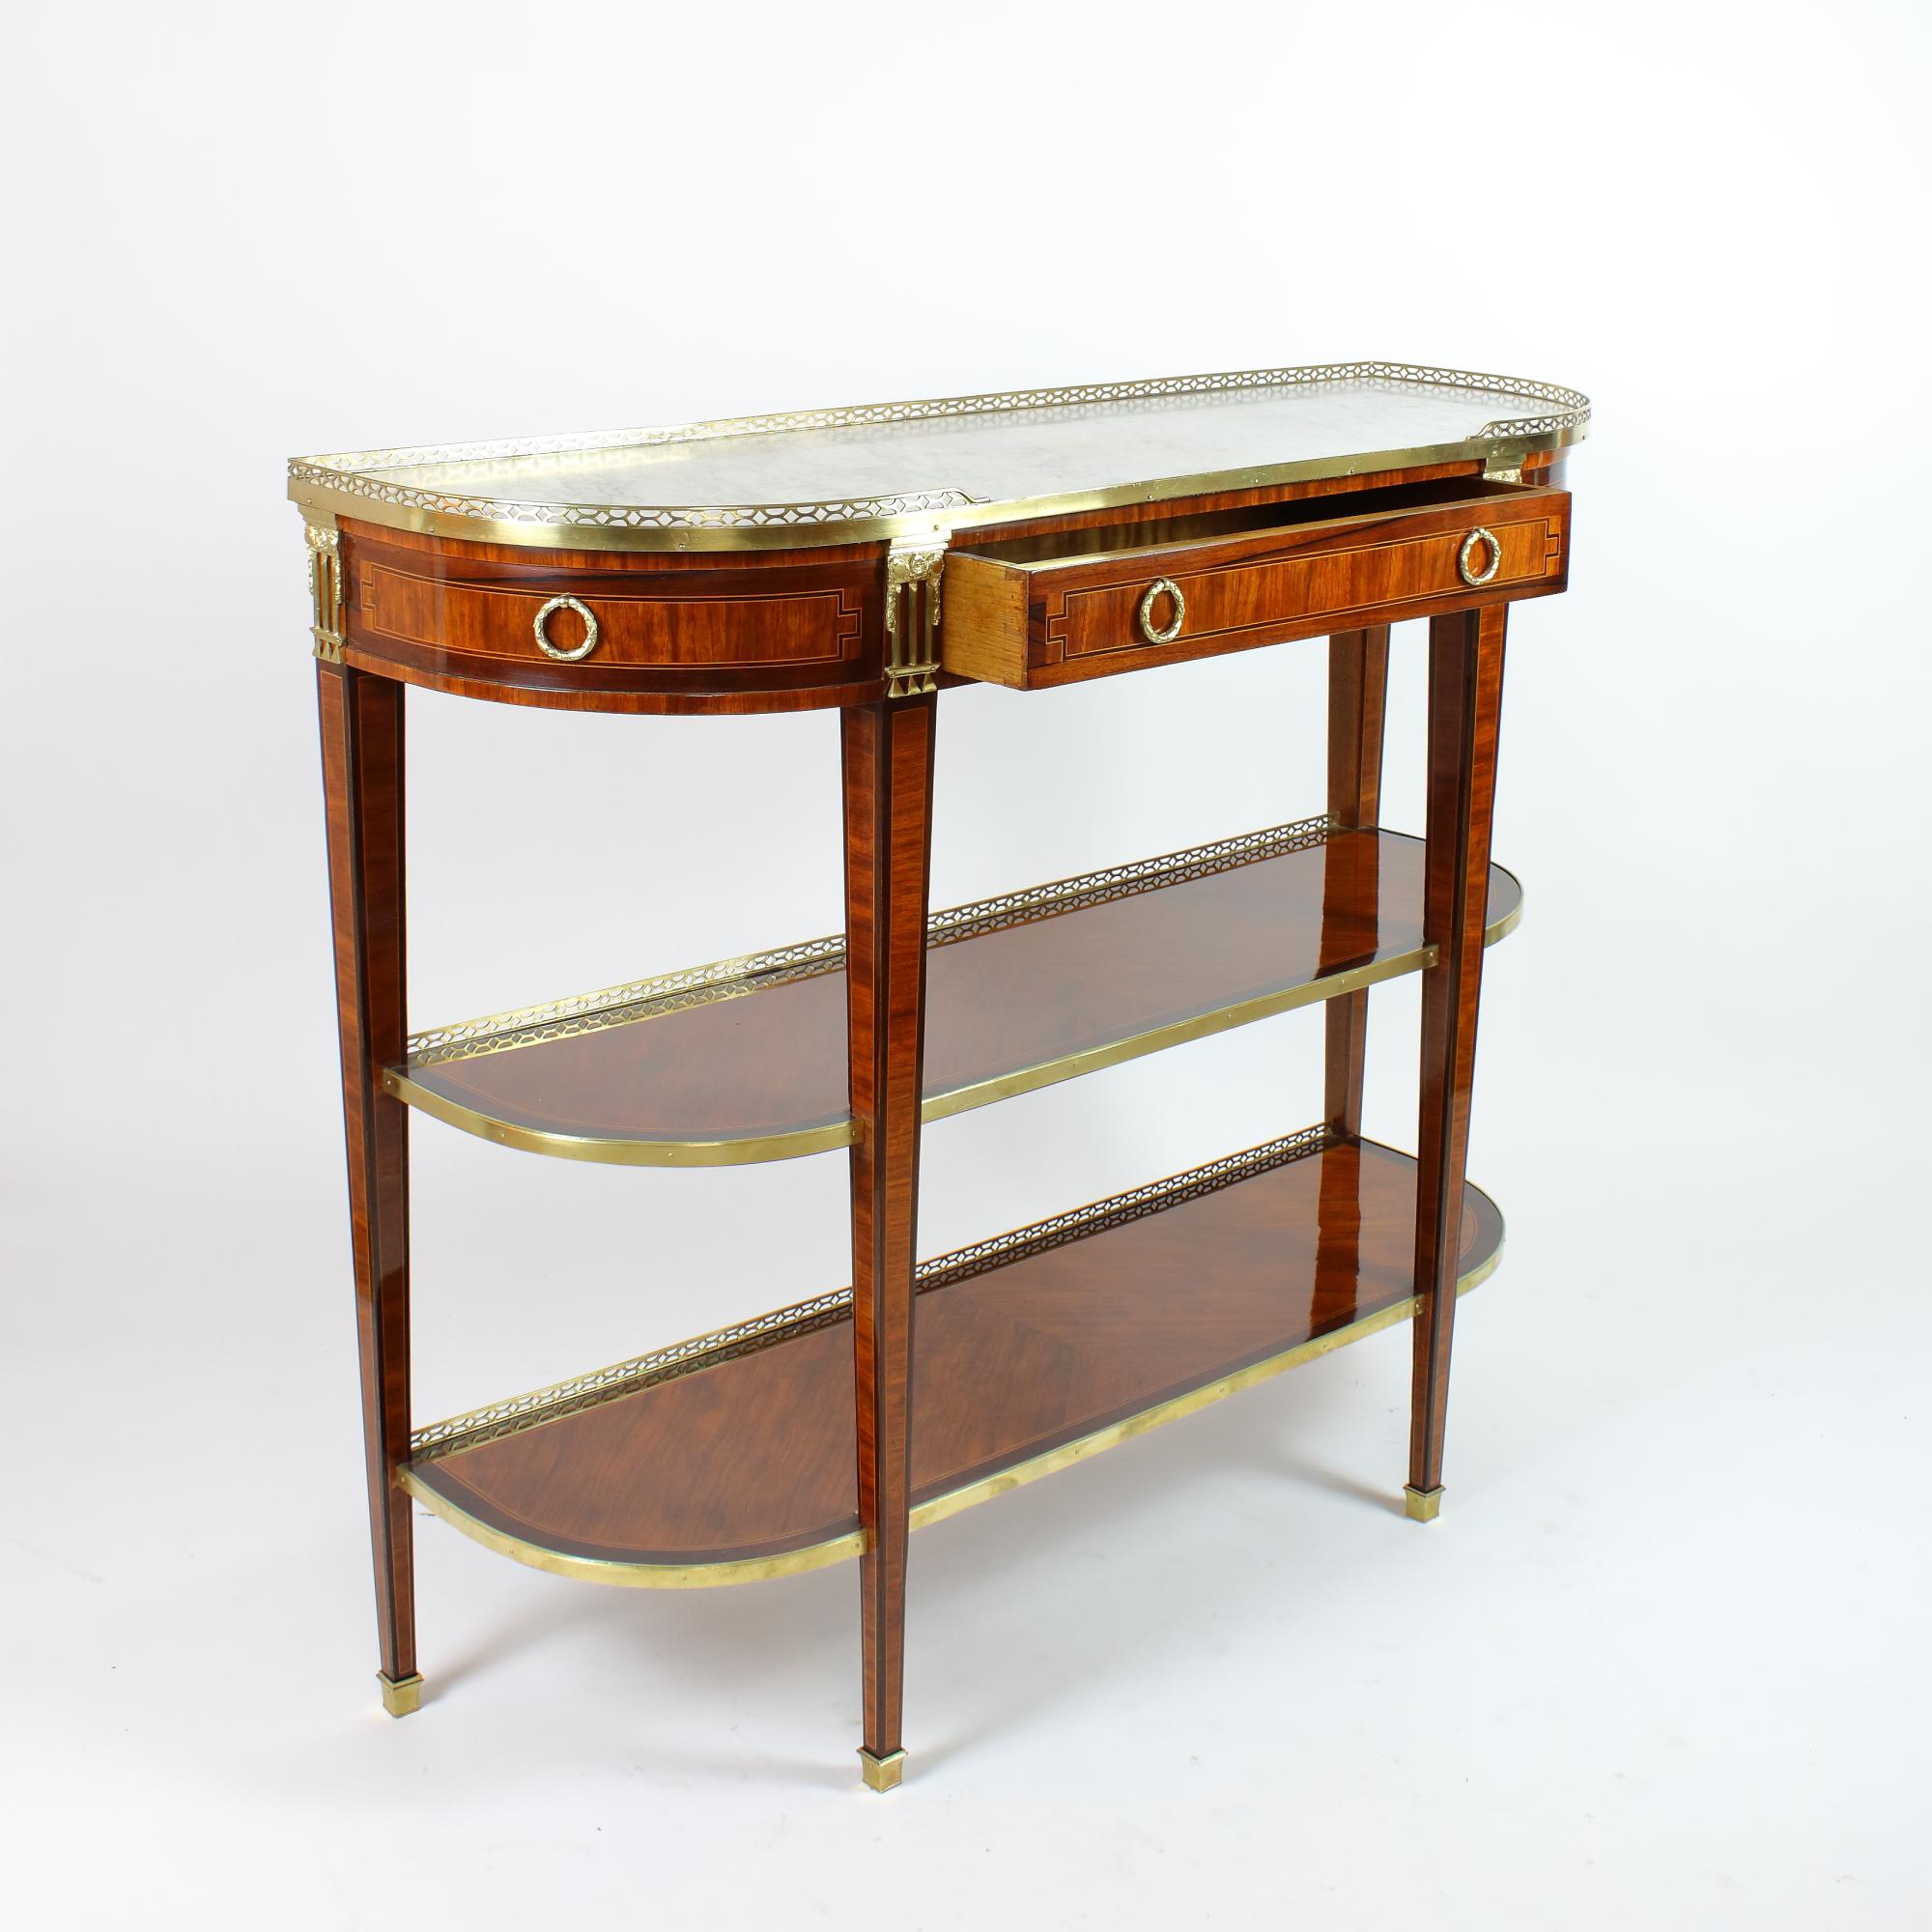 Late 18th Century French Louis XVI Marquetry Console Table or Desserte 6